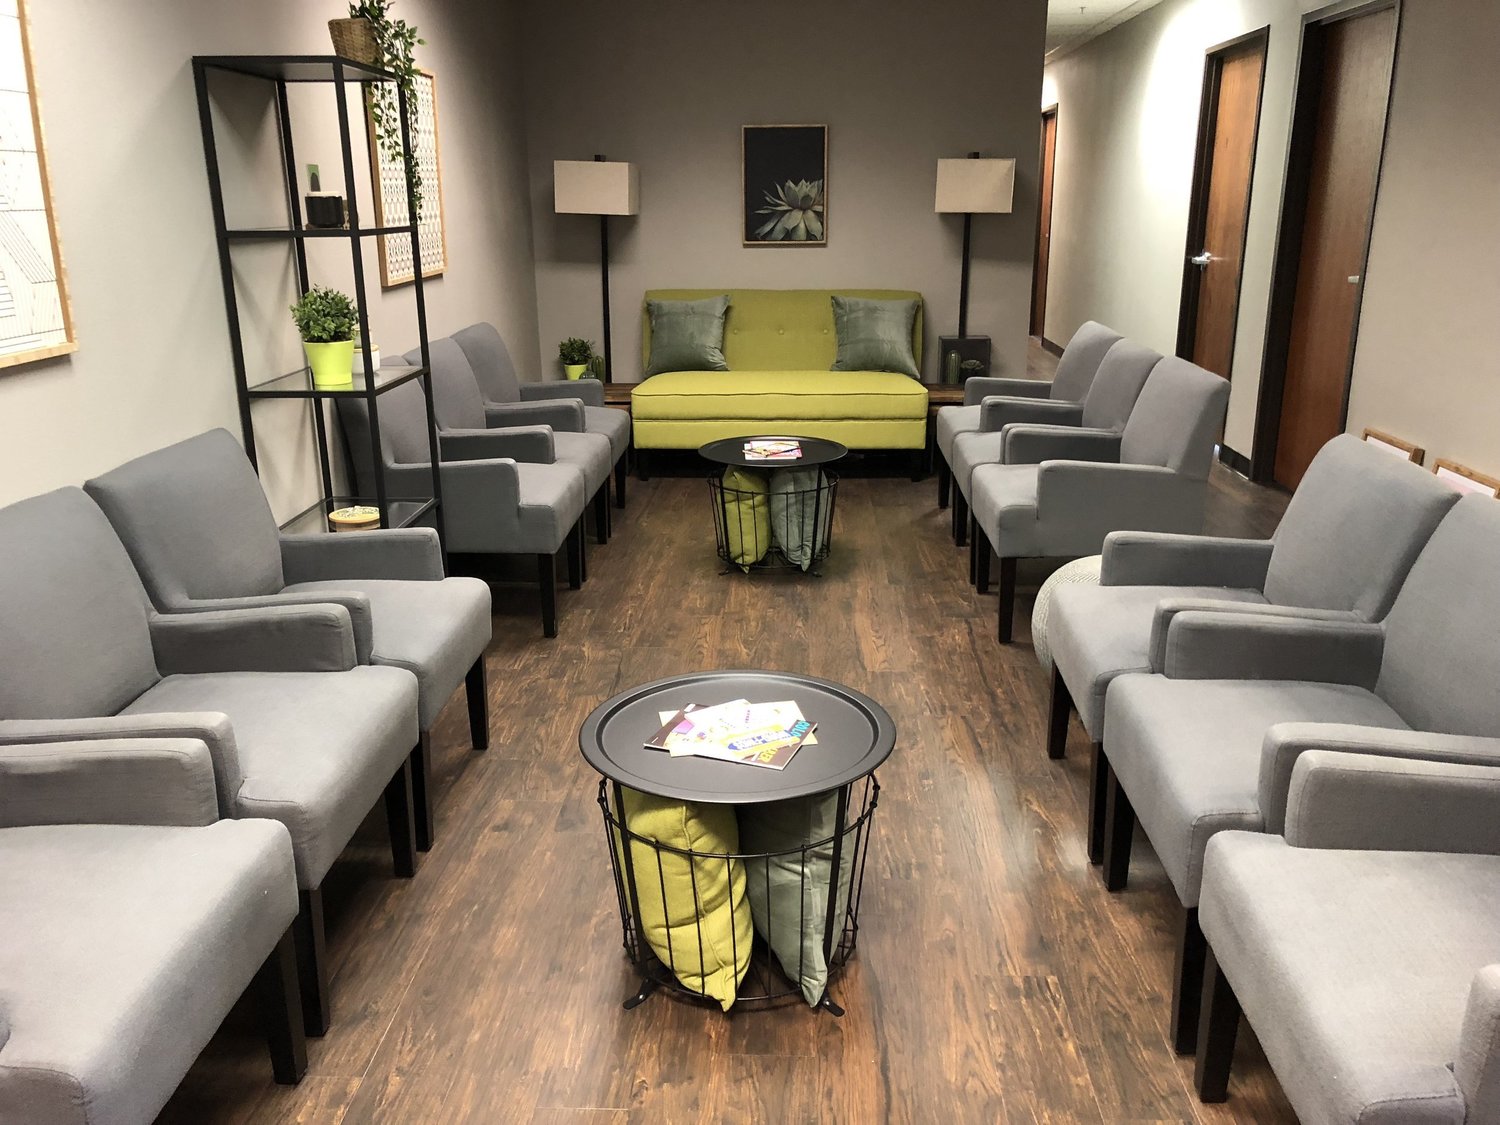 Gallery Photo of At Dallas Counseling & Treatment Center, we strive to create a therapeutic experience that is enjoyable every step of the way.